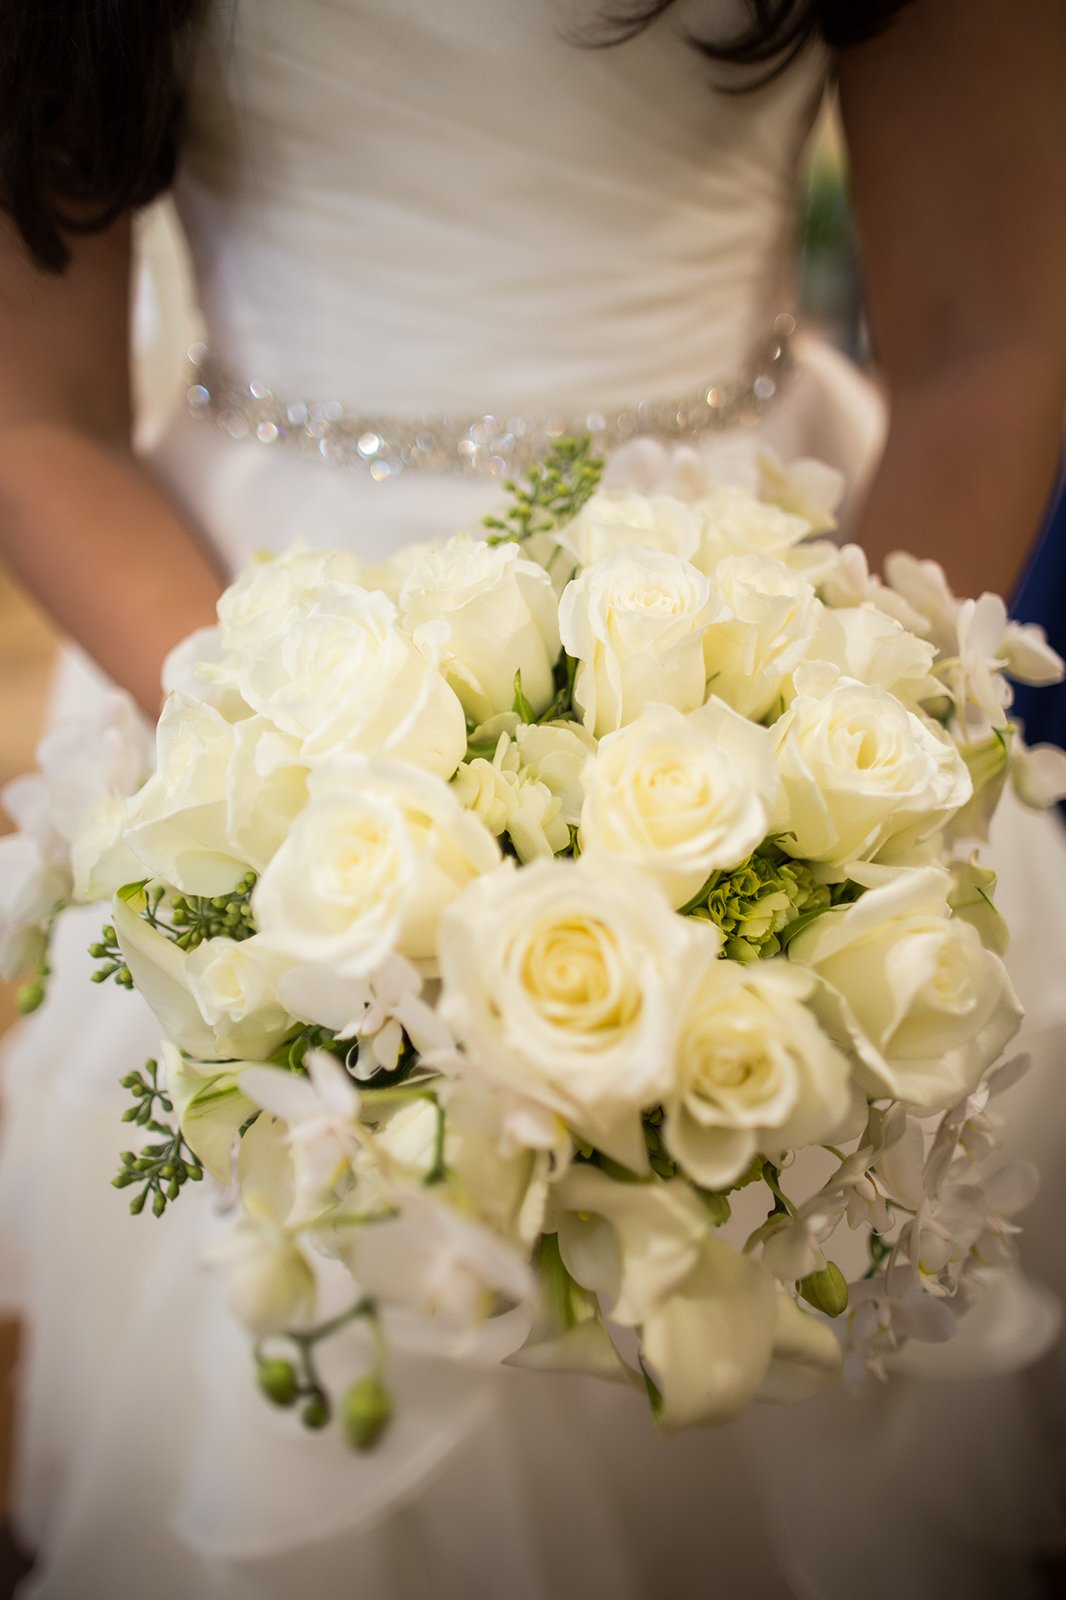 The gorgeous white bouquet includes white roes along with white orchids accompanied by seeded eucalyptus. 